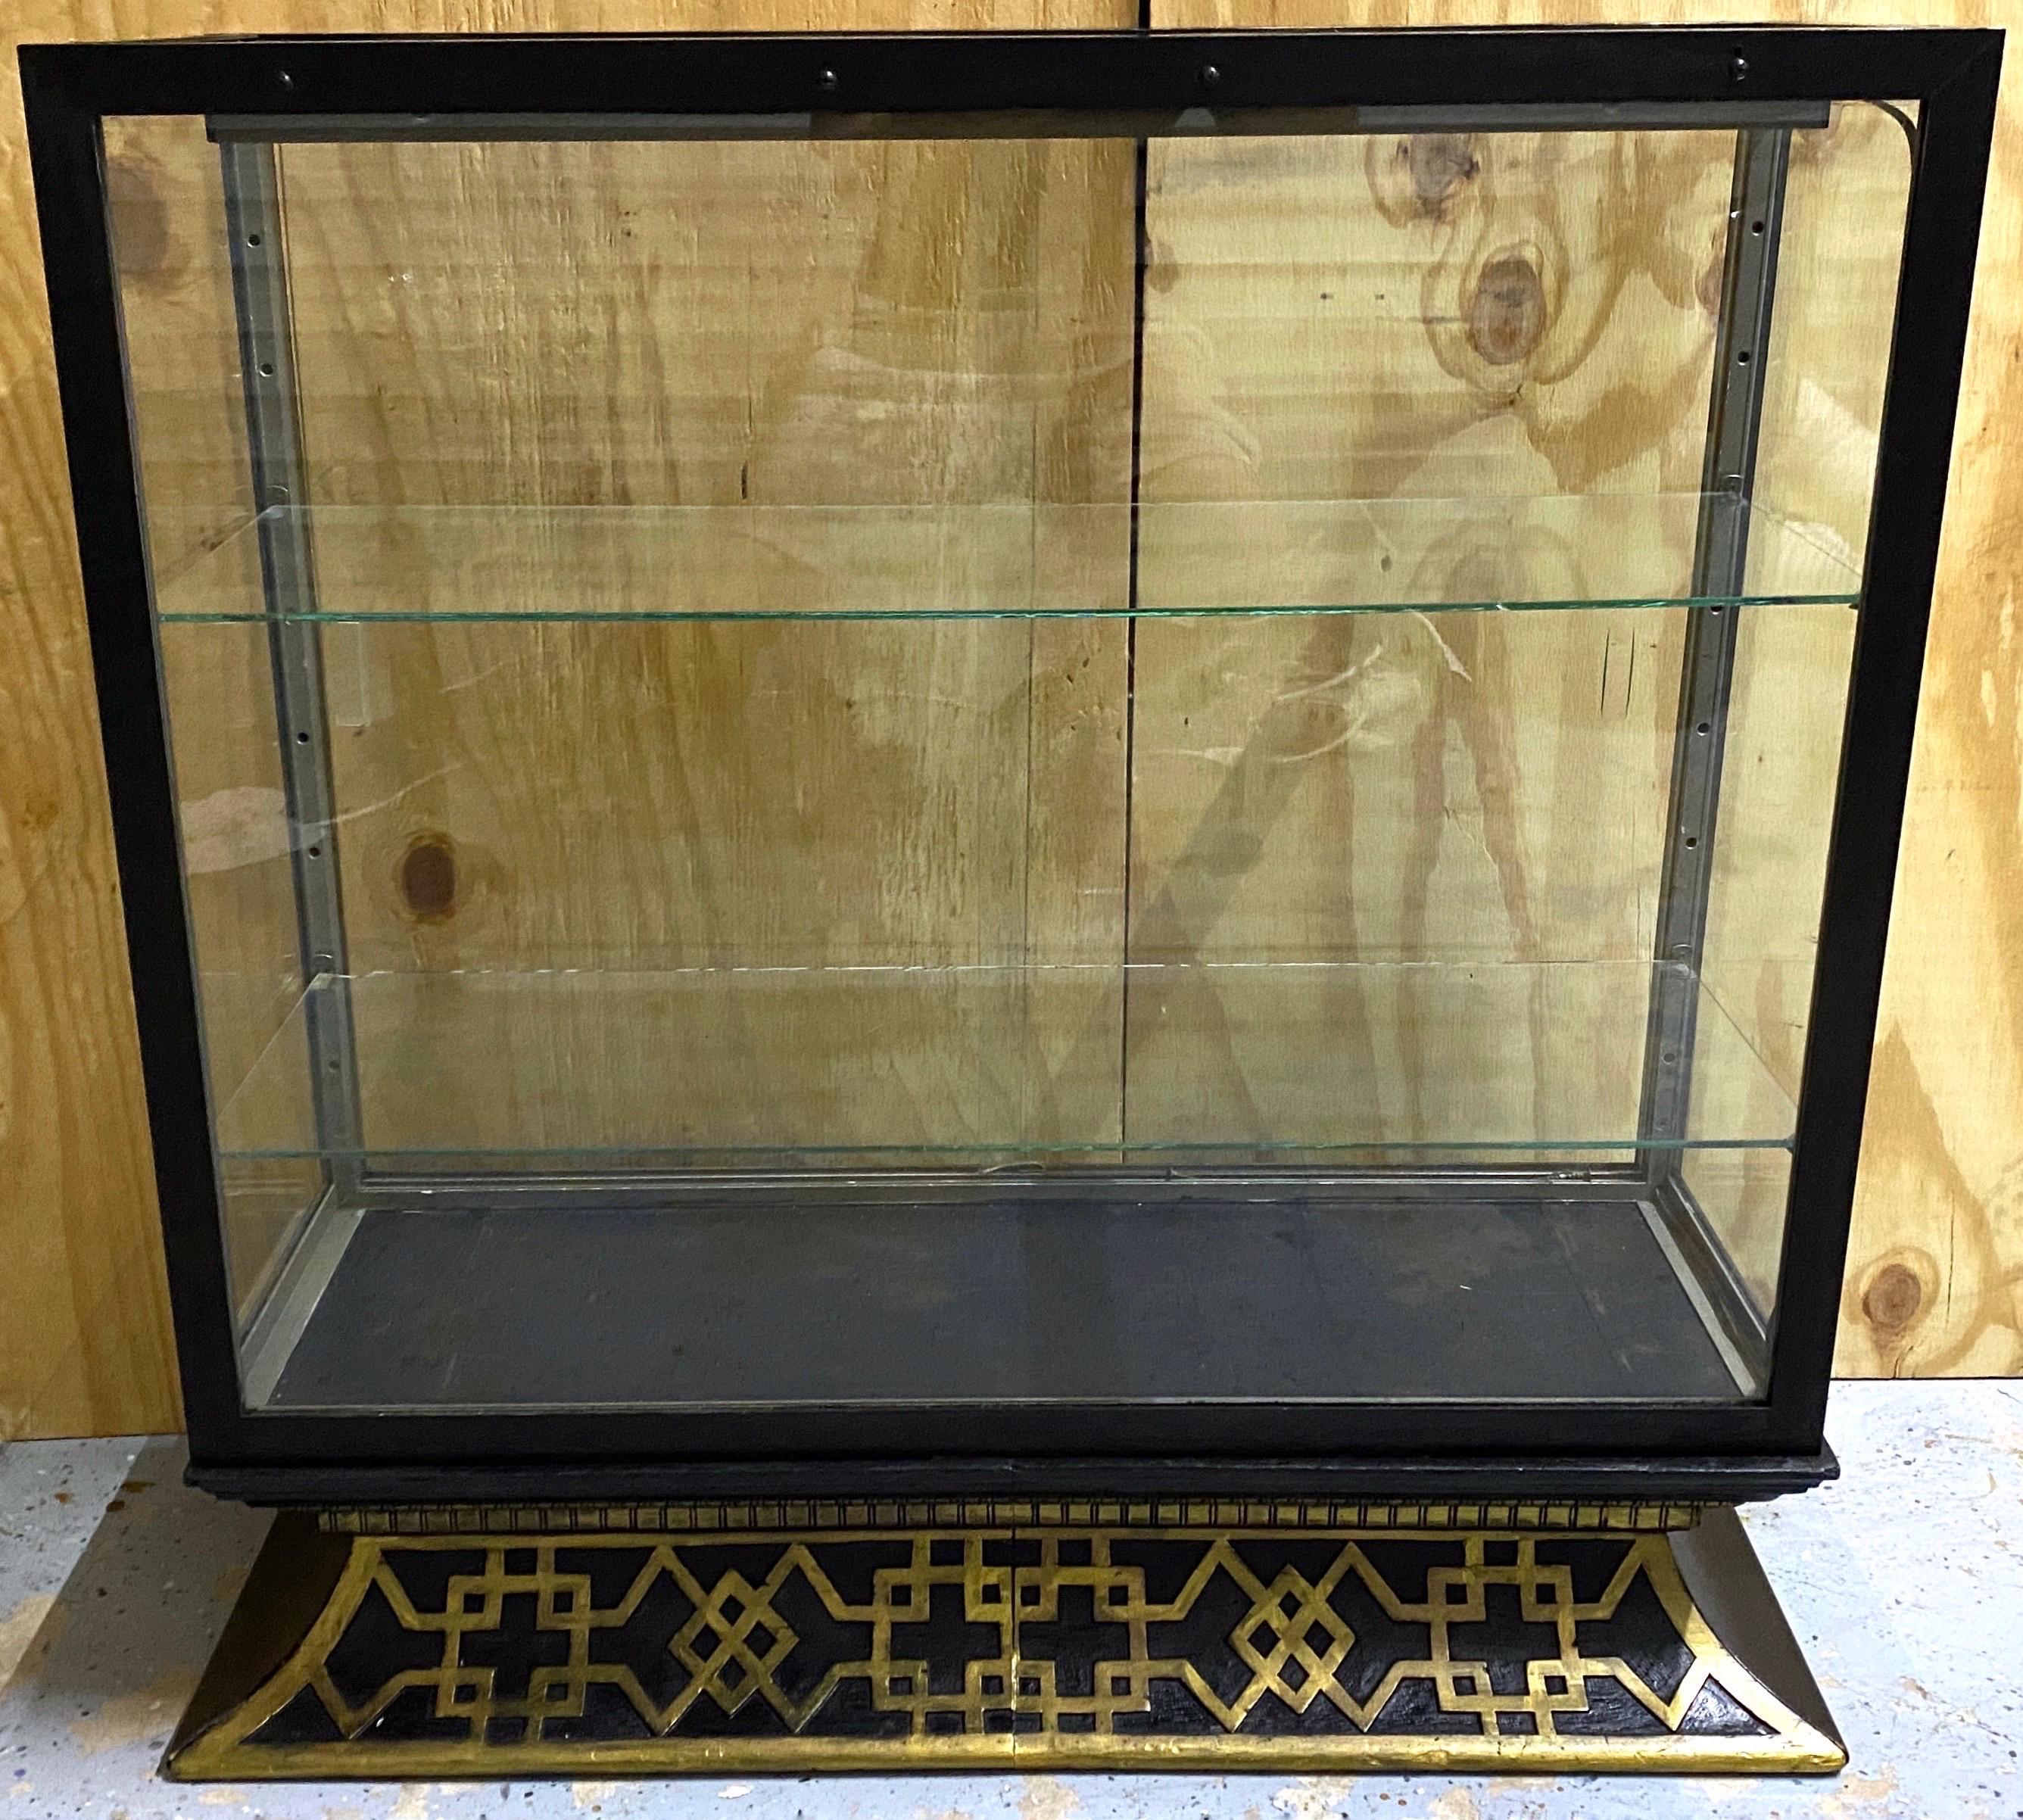 Art Deco Chinese Motif Display Case, From Cartier NYC Showroom, Circa 1920s 

Cartier showroom store fixture, Provenance by Repute, 
Saved from the refuse pile of a 1960s renovation NYC Cartier retail showroom. 

This exquisite Art Deco Chinese